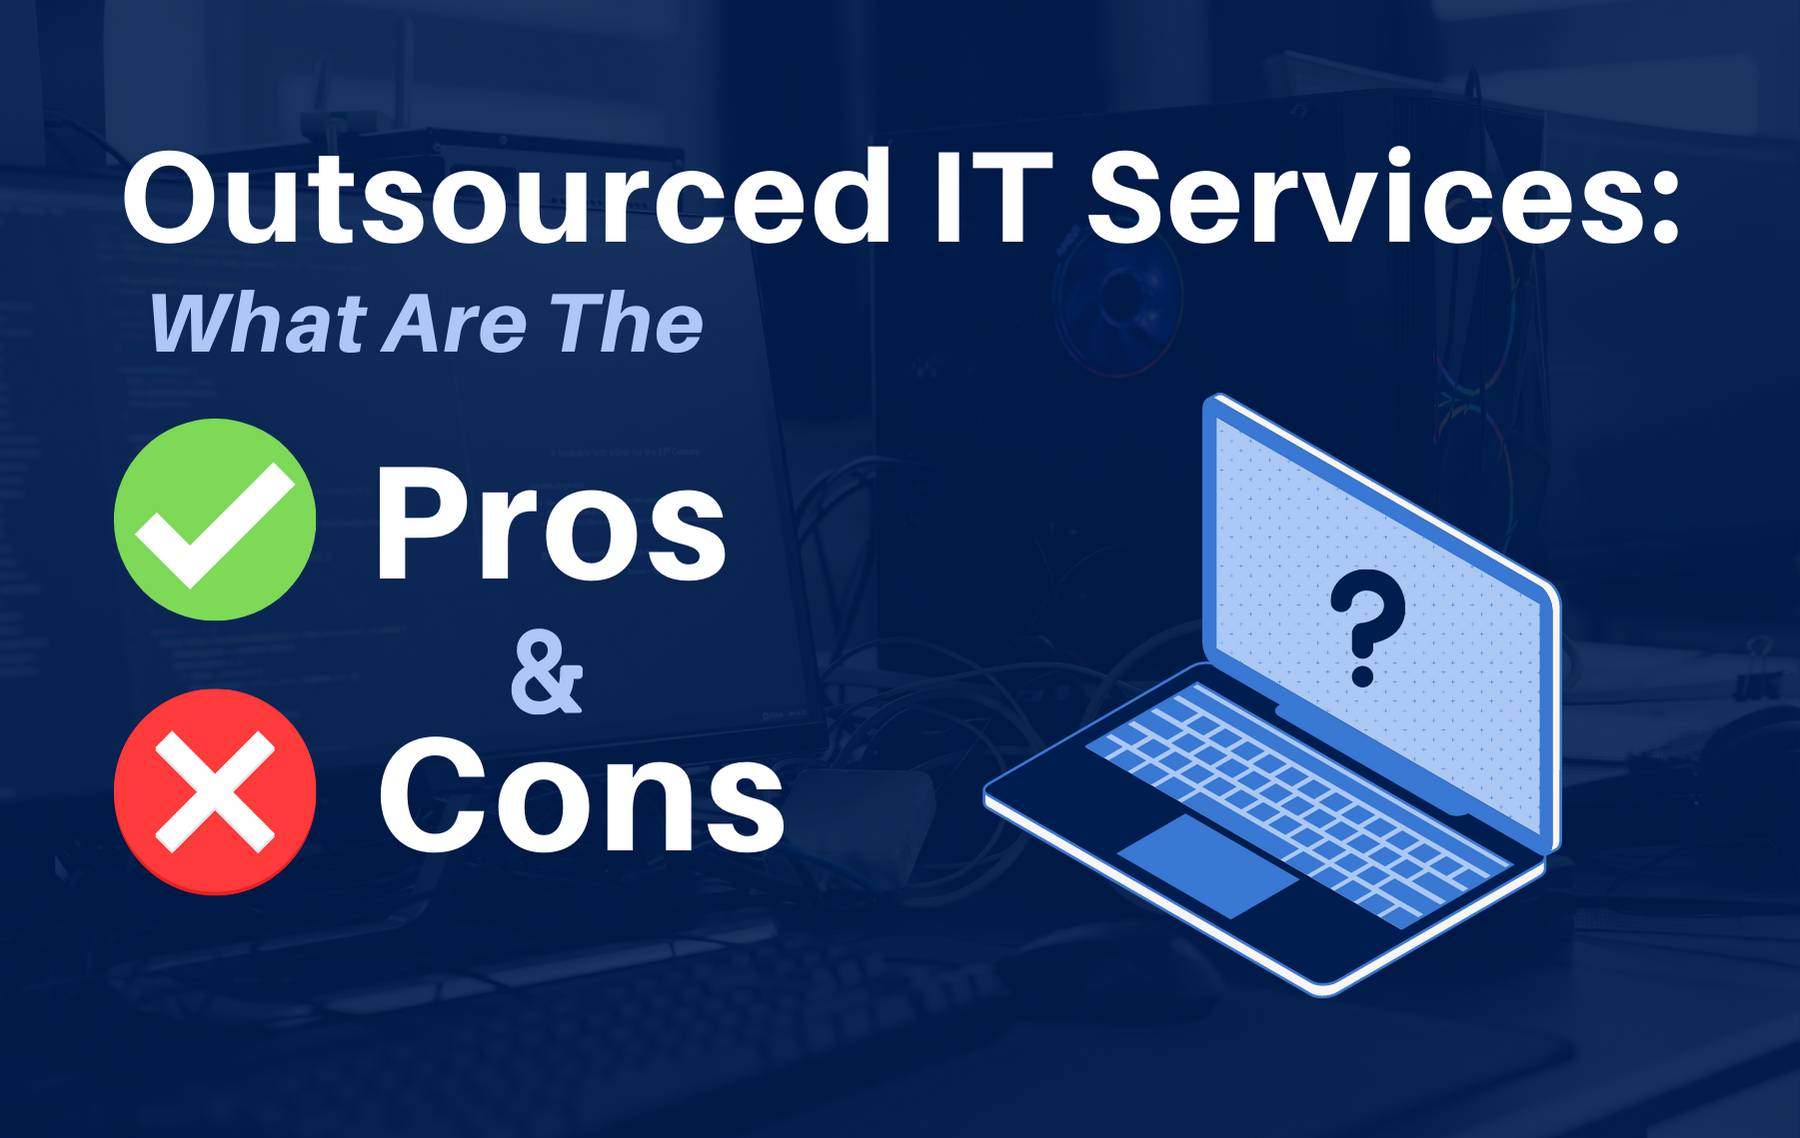 What Are the Pros and Cons of Outsourced IT Services?